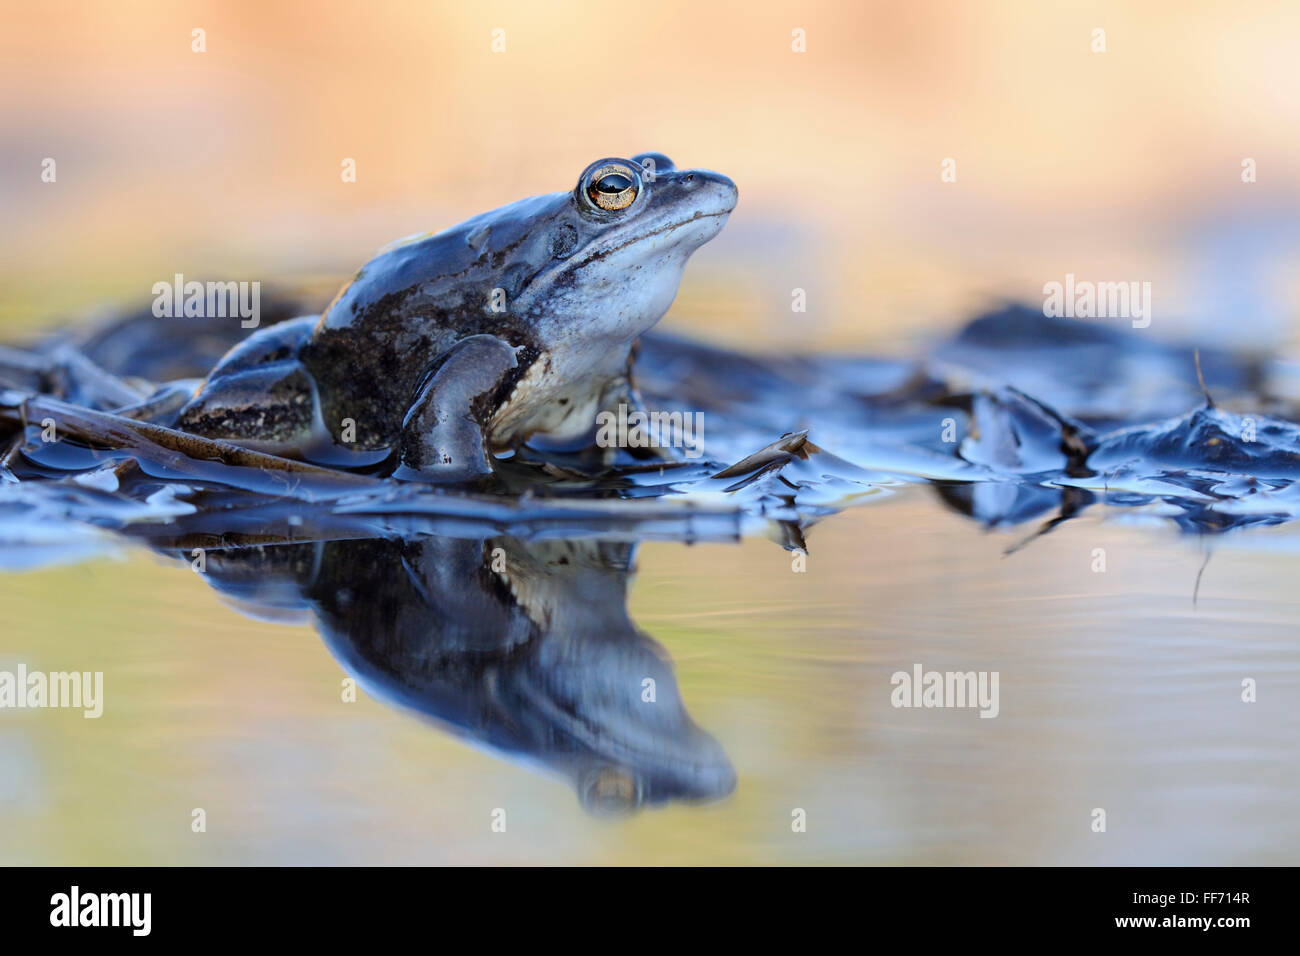 Moor Frog / Moorfosch ( Rana arvalis ), blue colored male sits on reed stems in a pond during its mating season in spring. Stock Photo